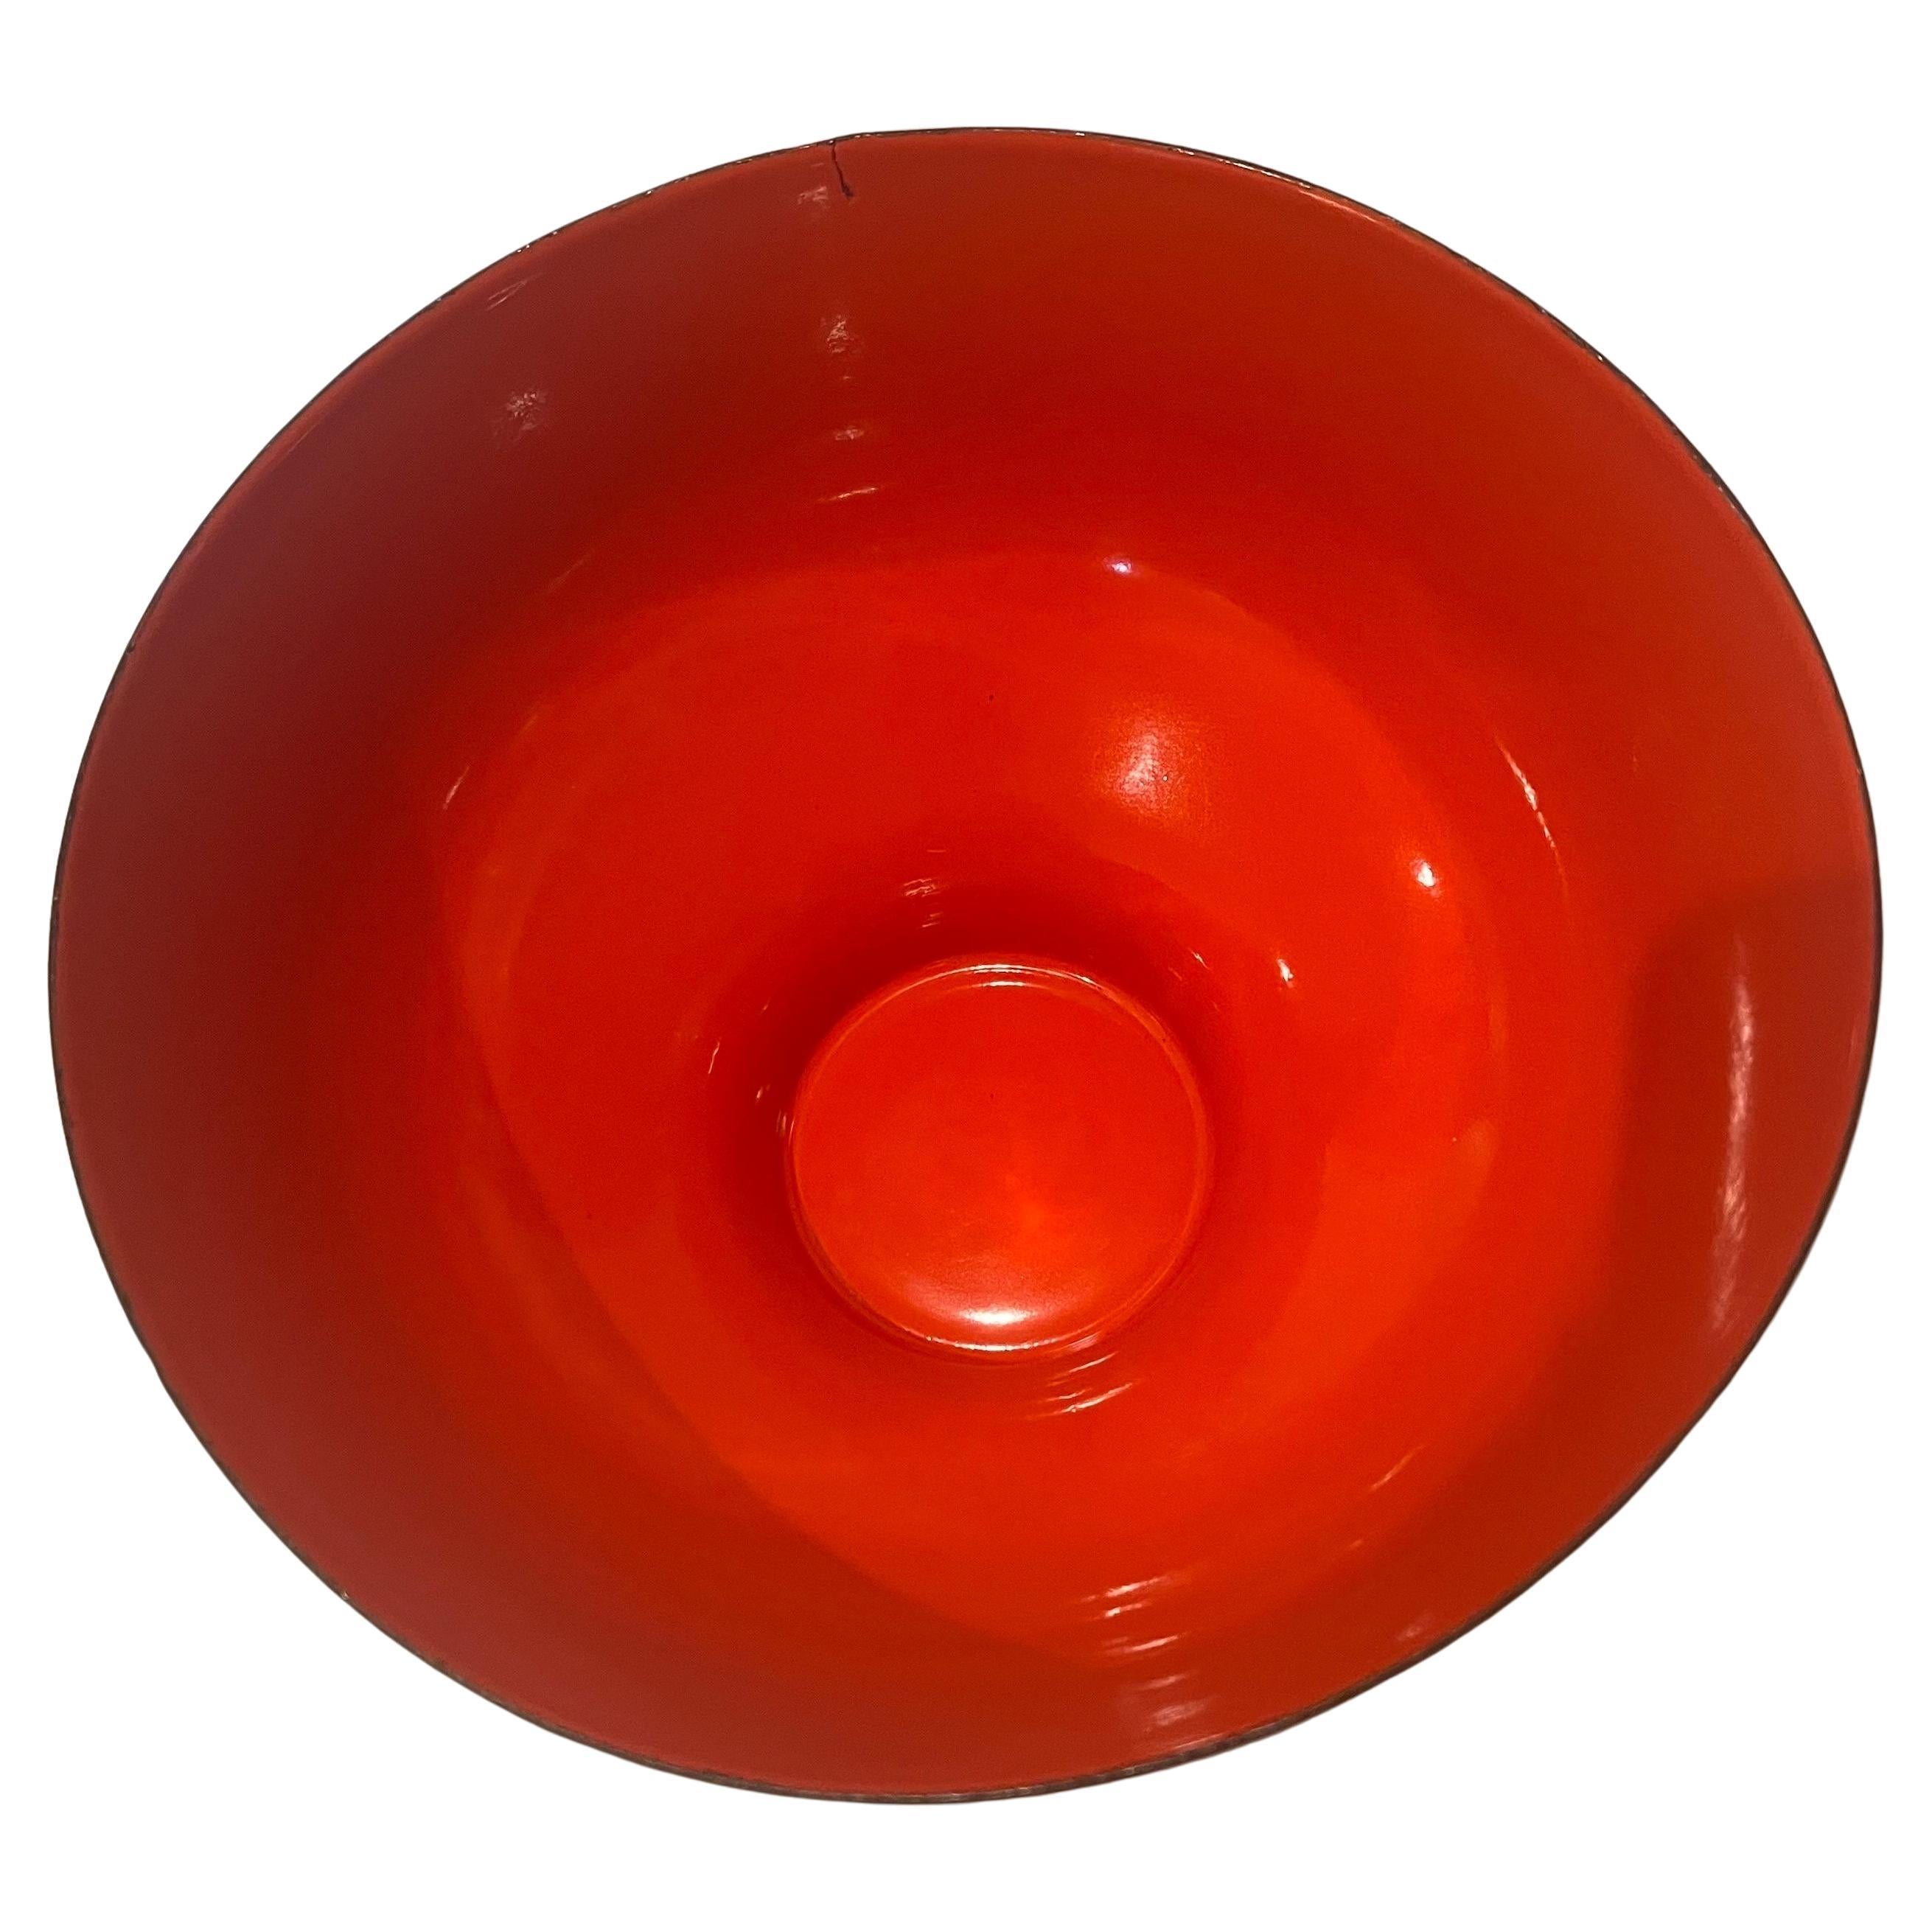 Danish modern orange/brown enamel Krenit bowl by Herbert Krenchel for Torben Orskov, circa the 1950s. Beautiful color nice condition very rare shape has a tiny original flaw on the edge .